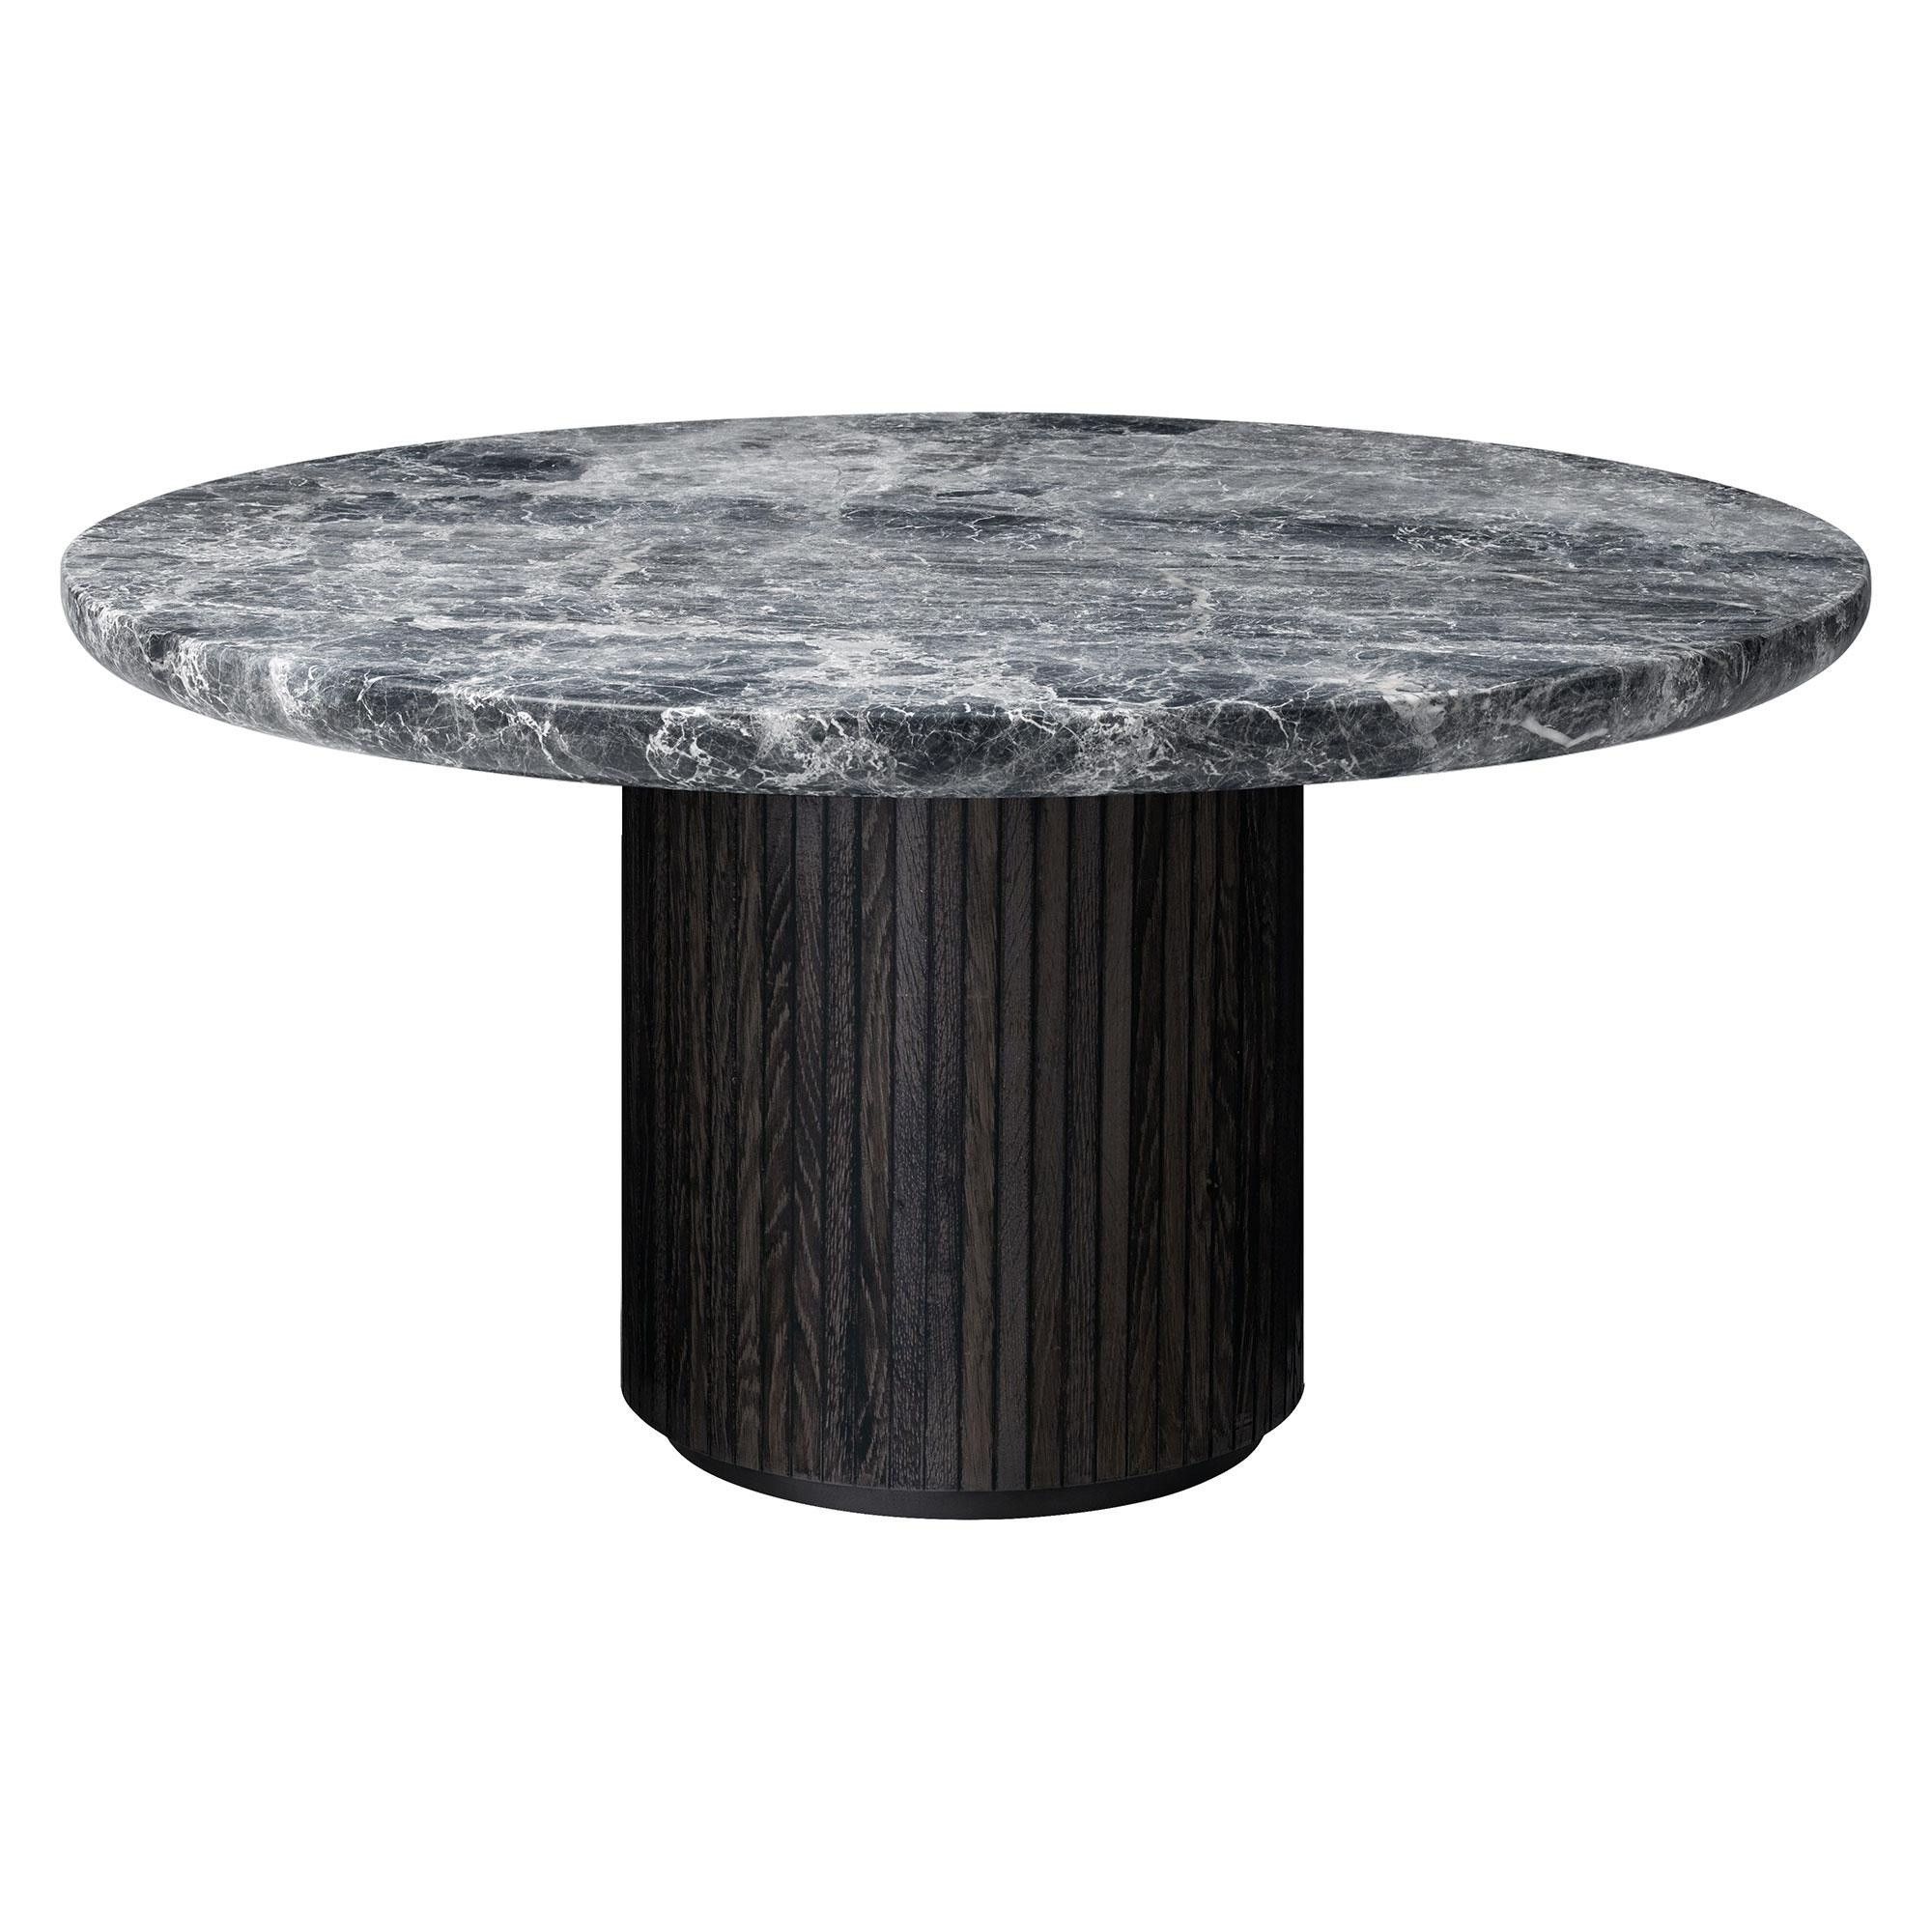 Gubi Moon Coffee Table Ø80cm | Ambientedirect Intended For Suspend Ii Marble And Wood Coffee Tables (View 29 of 30)